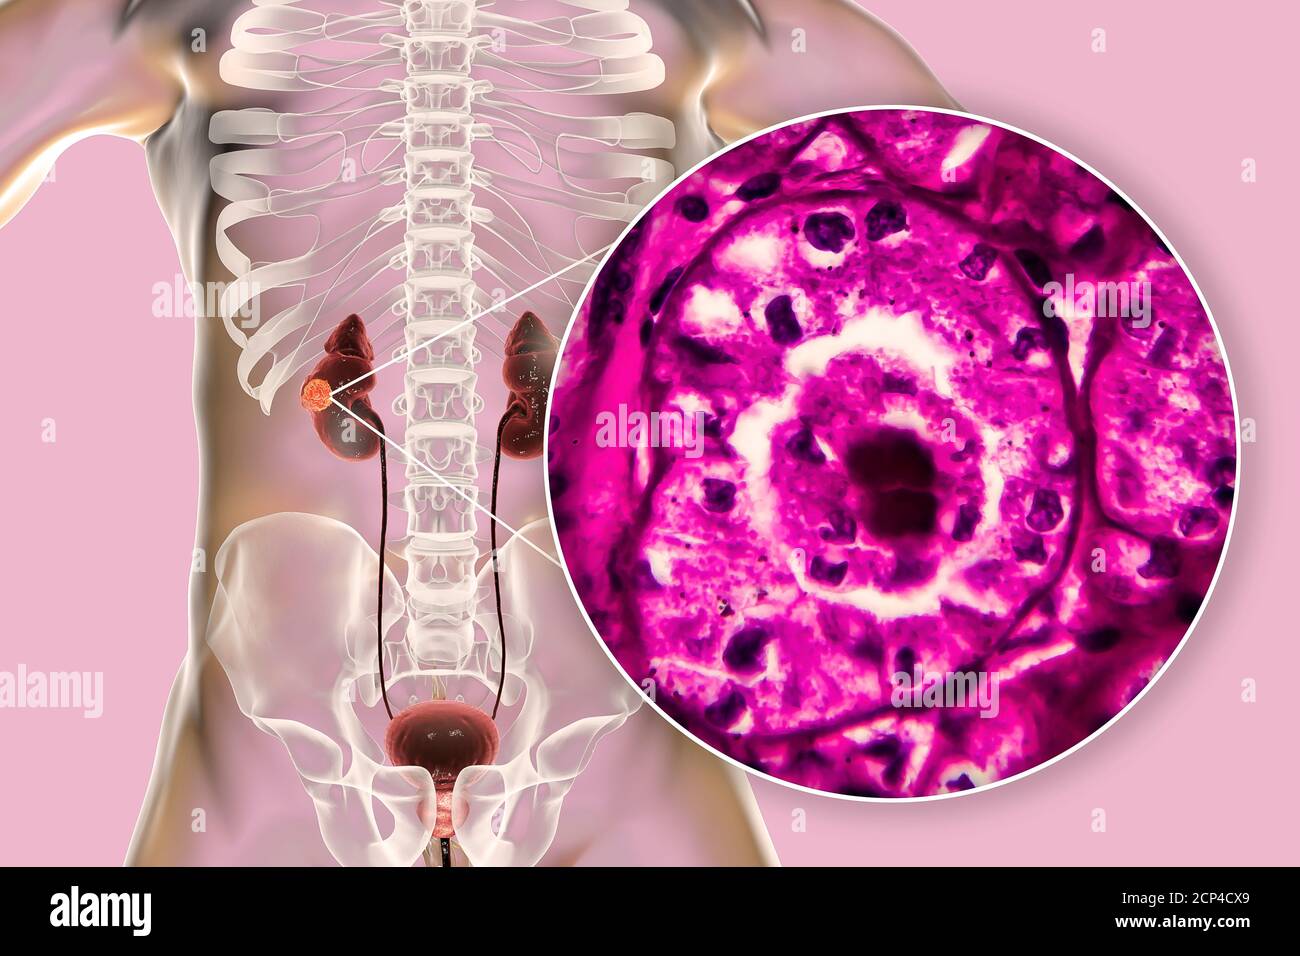 Kidney cancer, computer illustration and light micrograph. Stock Photo